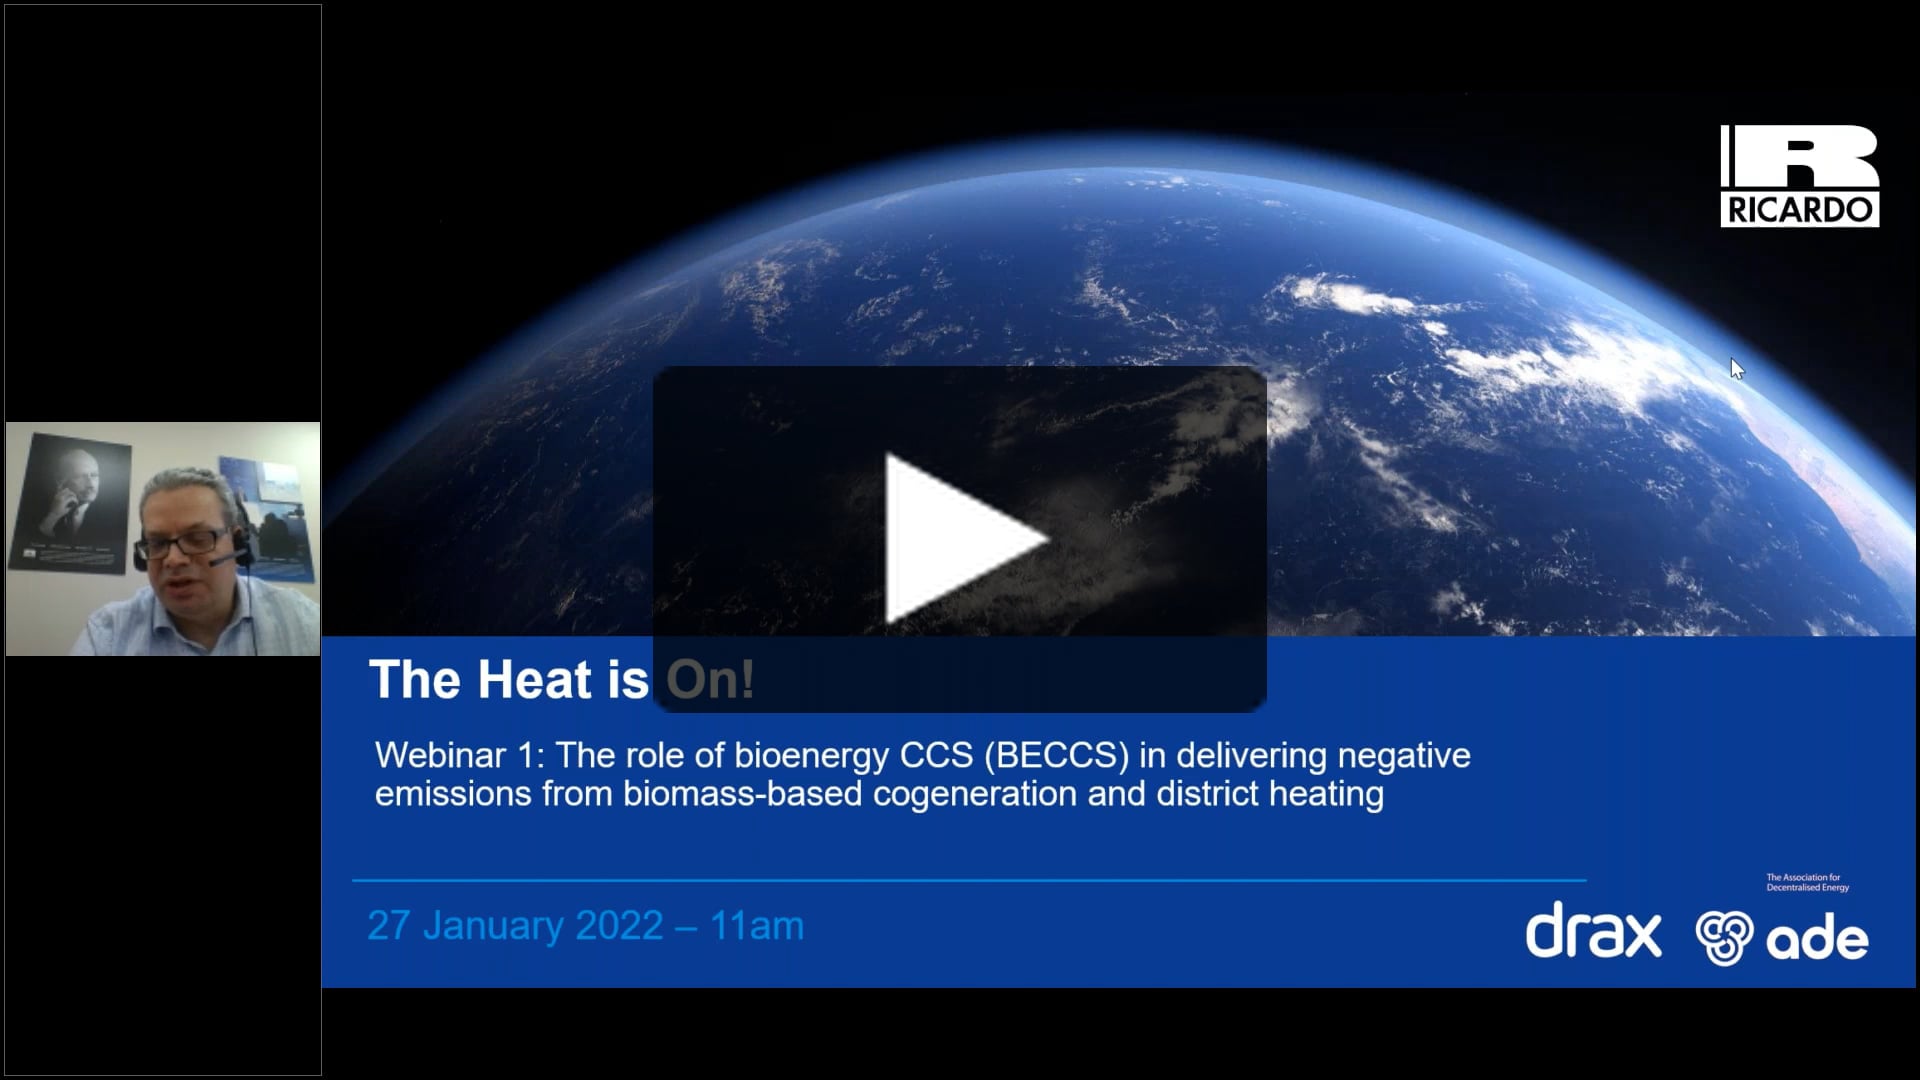 Using bioenergy CCS (BECCS) to deliver negative emissions